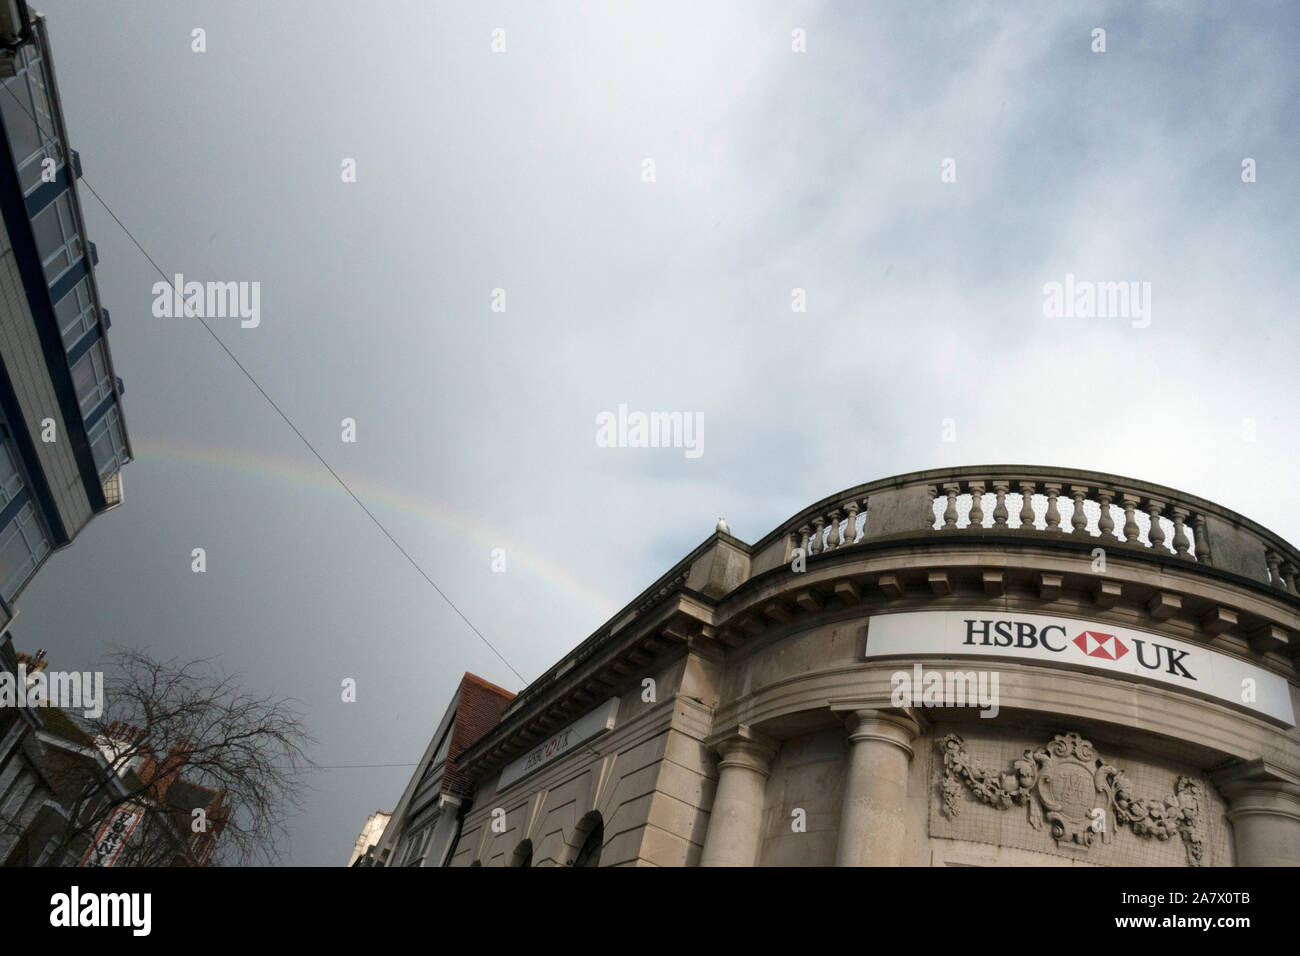 HSBC UK Bank with rainbow in the sky Stock Photo